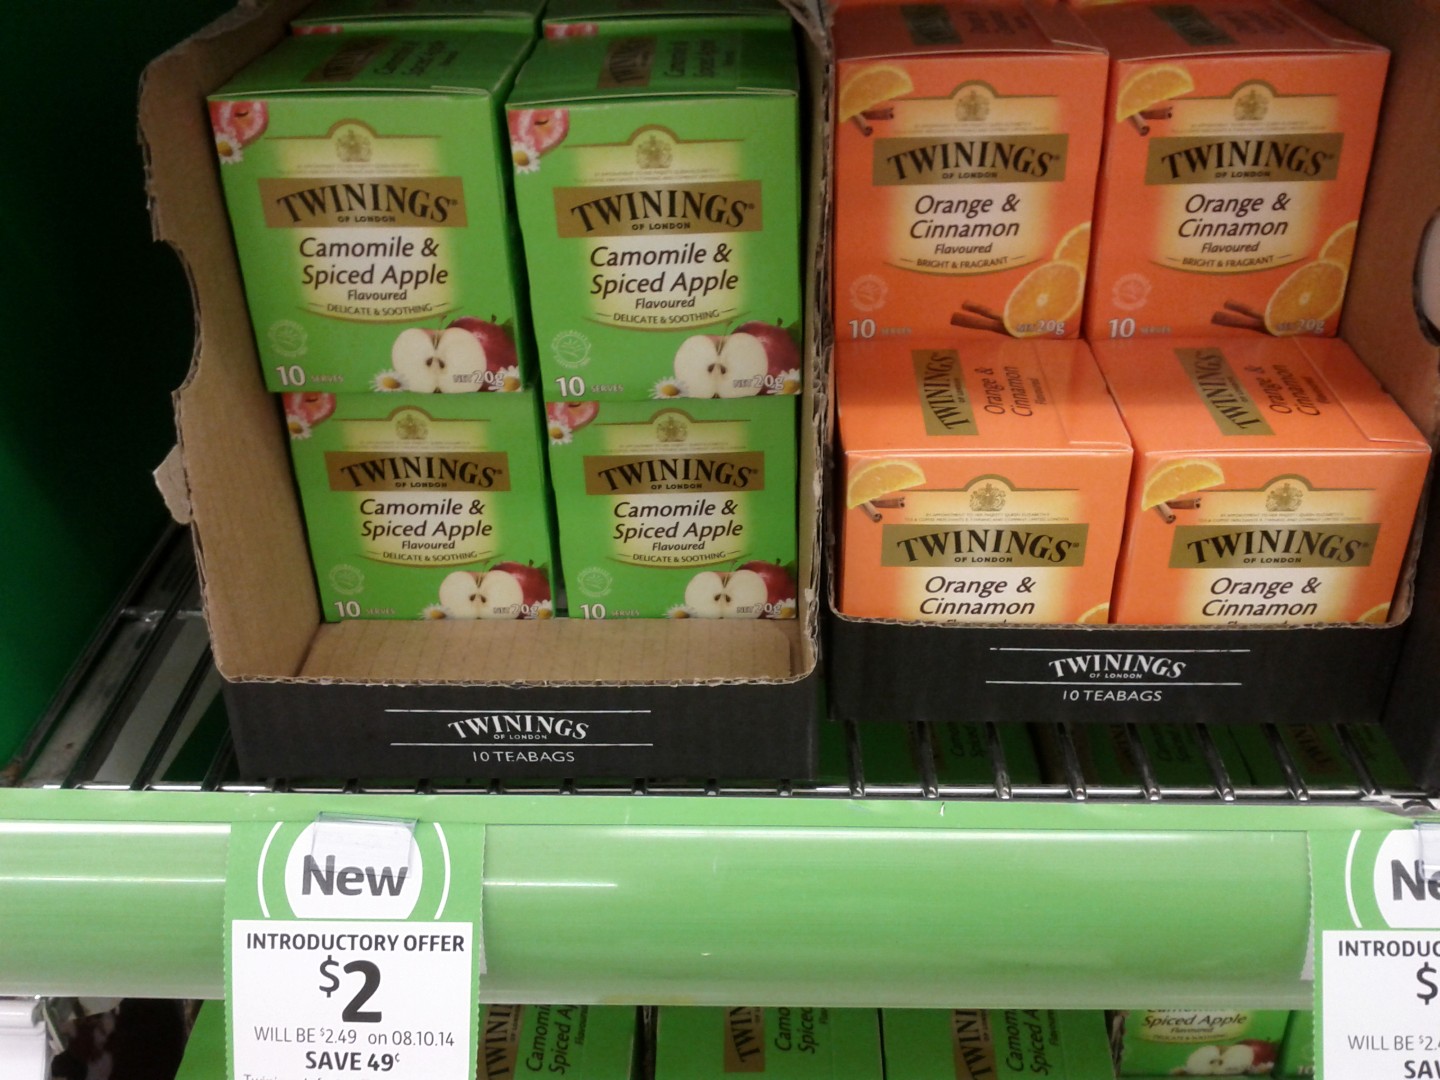 Twinings Canomile and Spiced Apple Flavour & Orange and Cinnamon